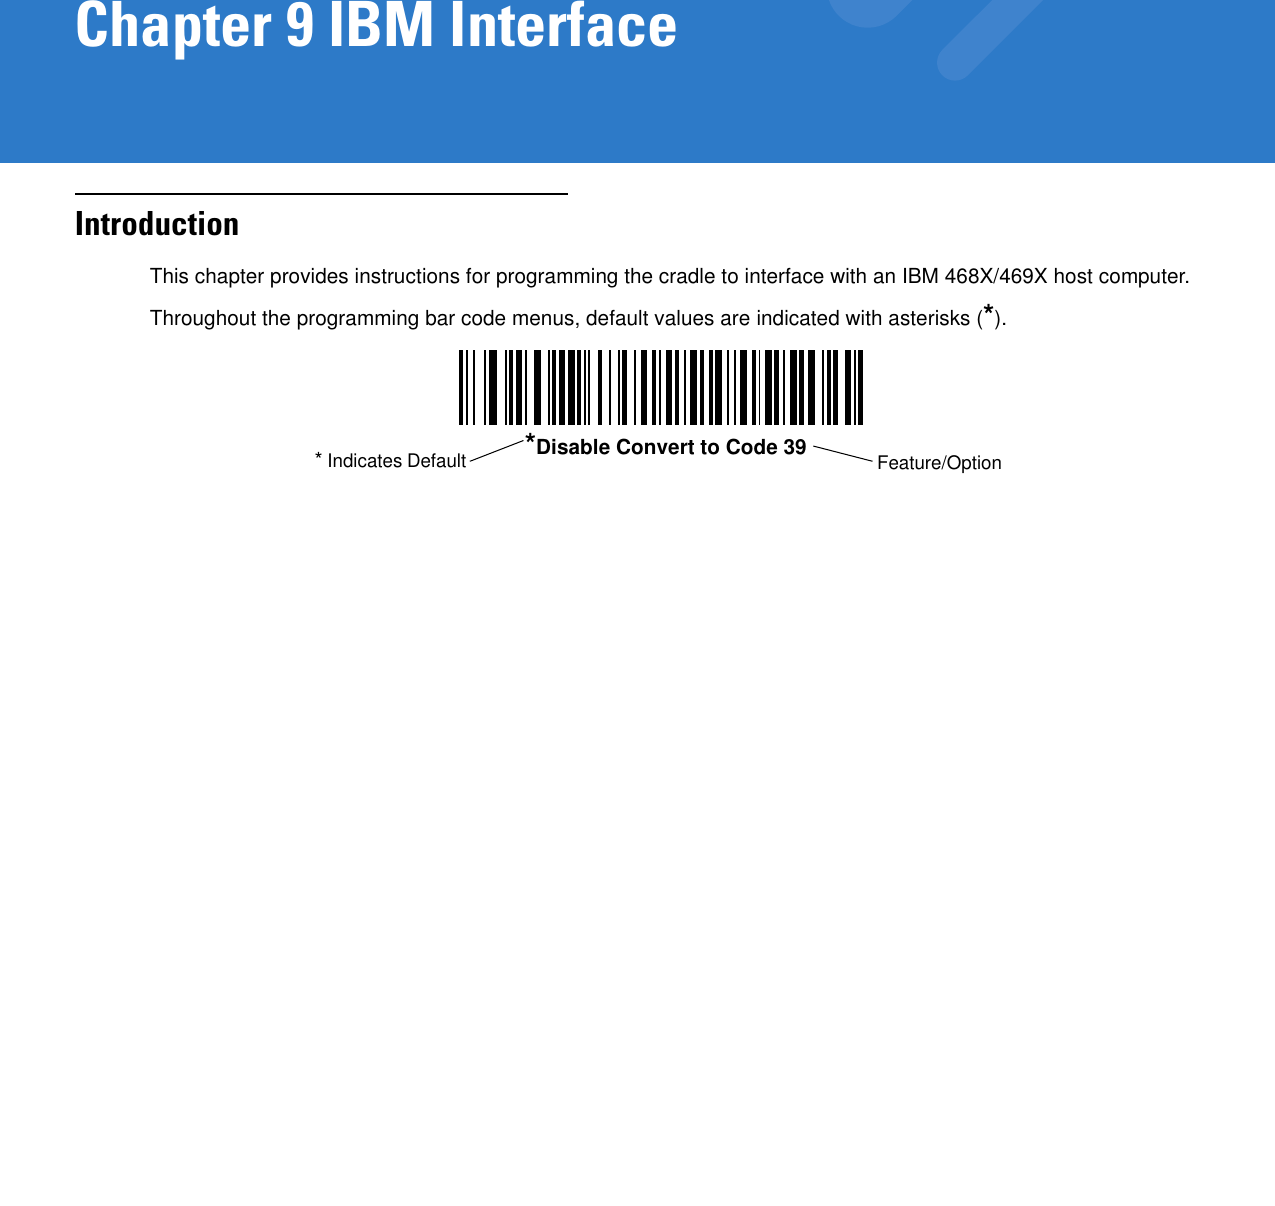 Chapter 9 IBM InterfaceIntroductionThis chapter provides instructions for programming the cradle to interface with an IBM 468X/469X host computer.Throughout the programming bar code menus, default values are indicated with asterisks (*).*Disable Convert to Code 39 Feature/Option* Indicates Default